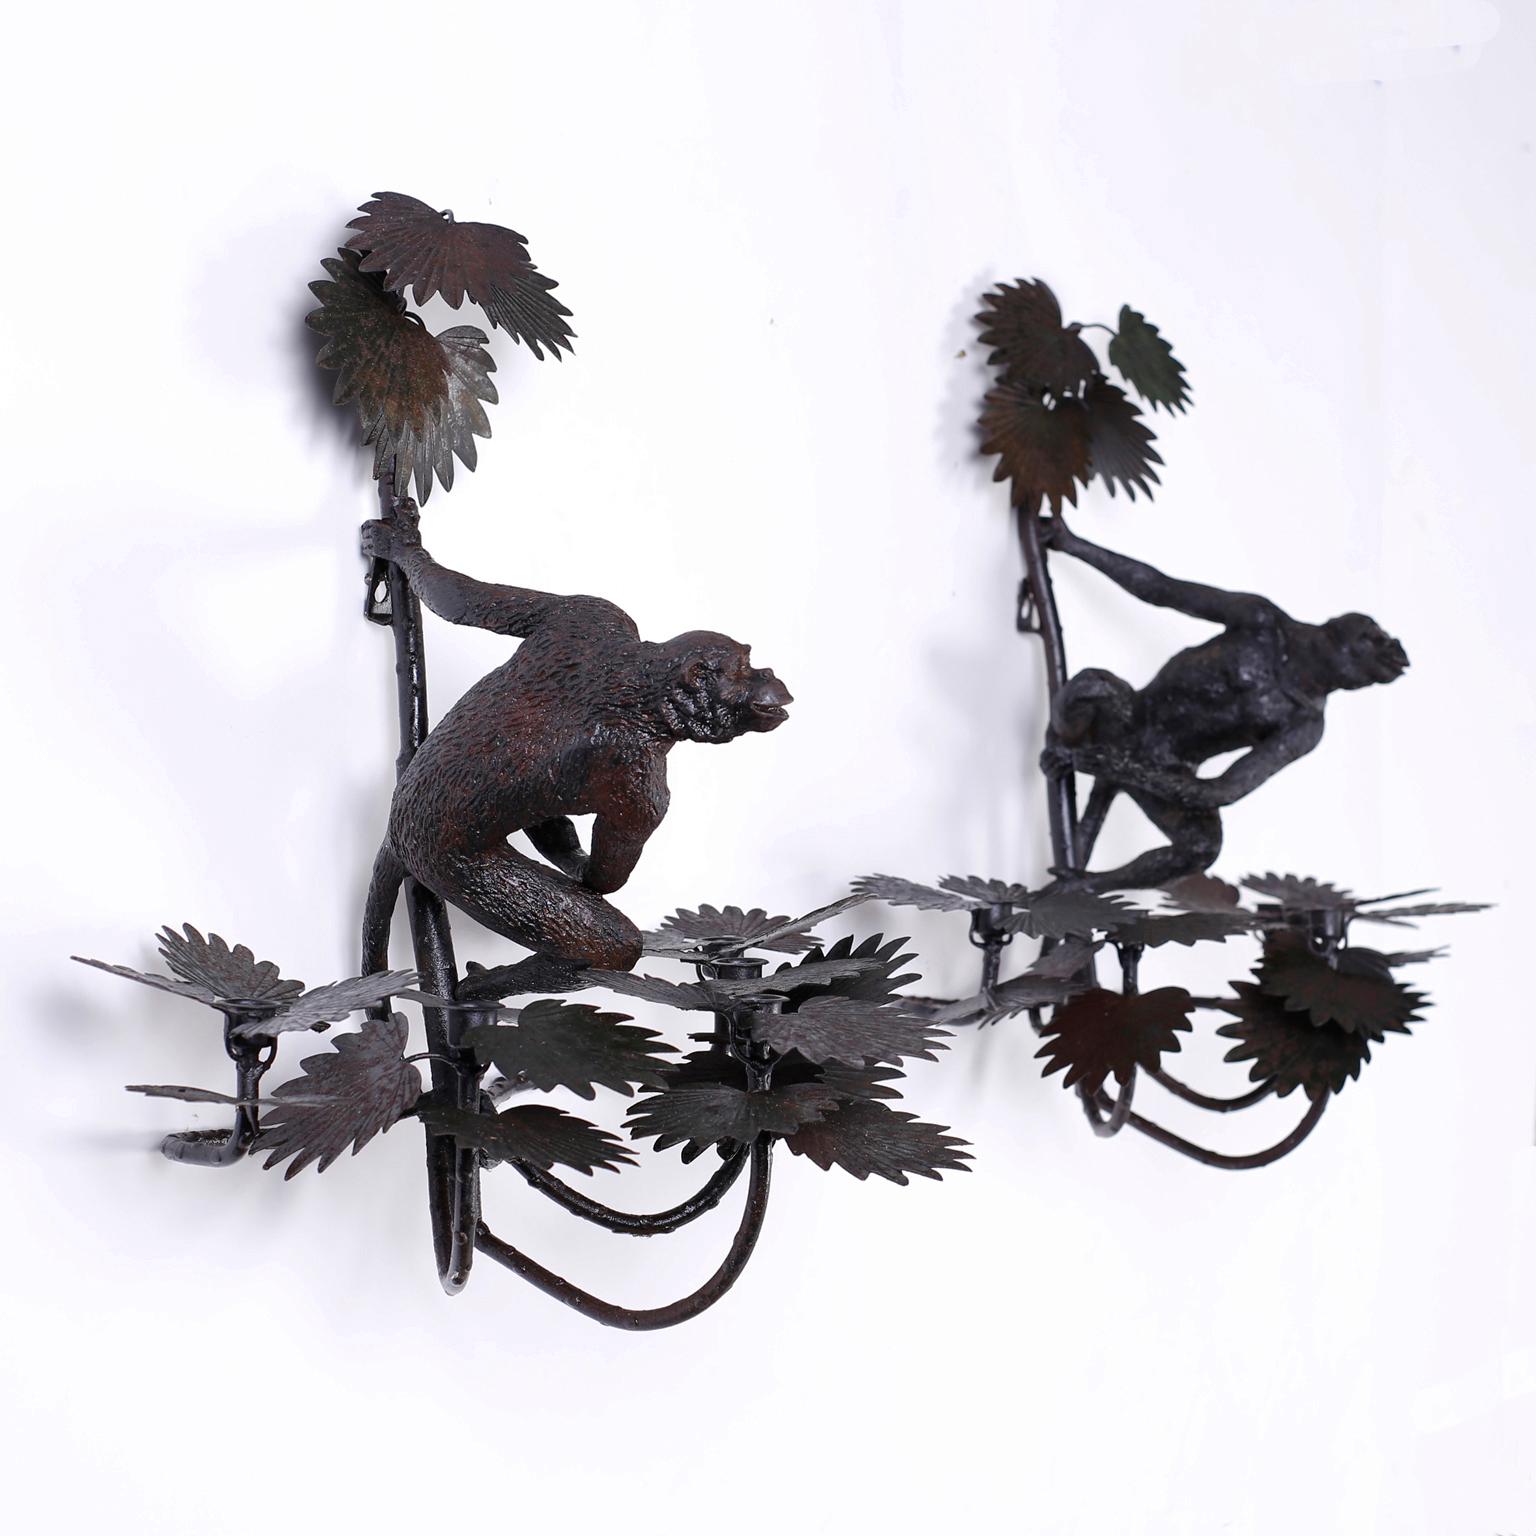 Pair of wall sconces with a slightly oxidized finish, five candle cups in palm leaf clusters, and featuring cast iron monkeys in a familiar, taunting pose.